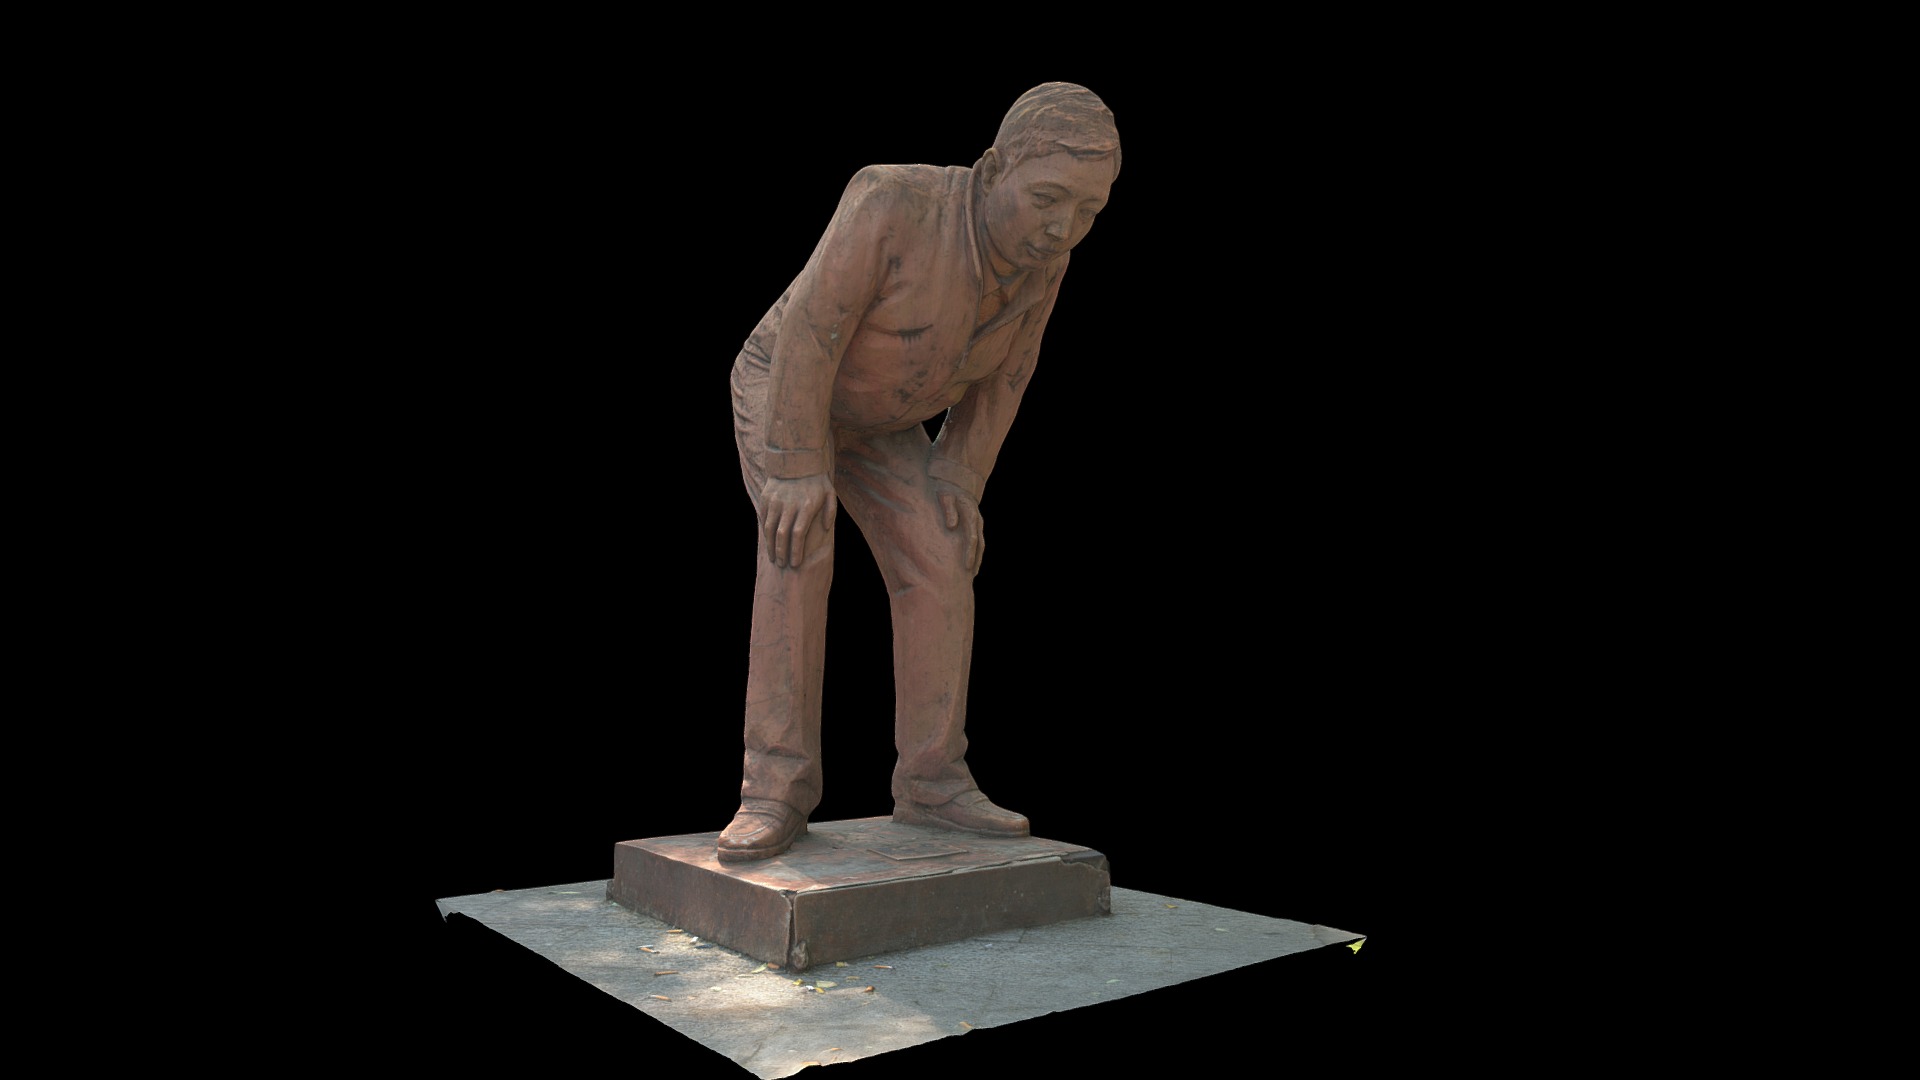 3D model 2019-09 – Beijing 43 - This is a 3D model of the 2019-09 - Beijing 43. The 3D model is about a statue of a person.